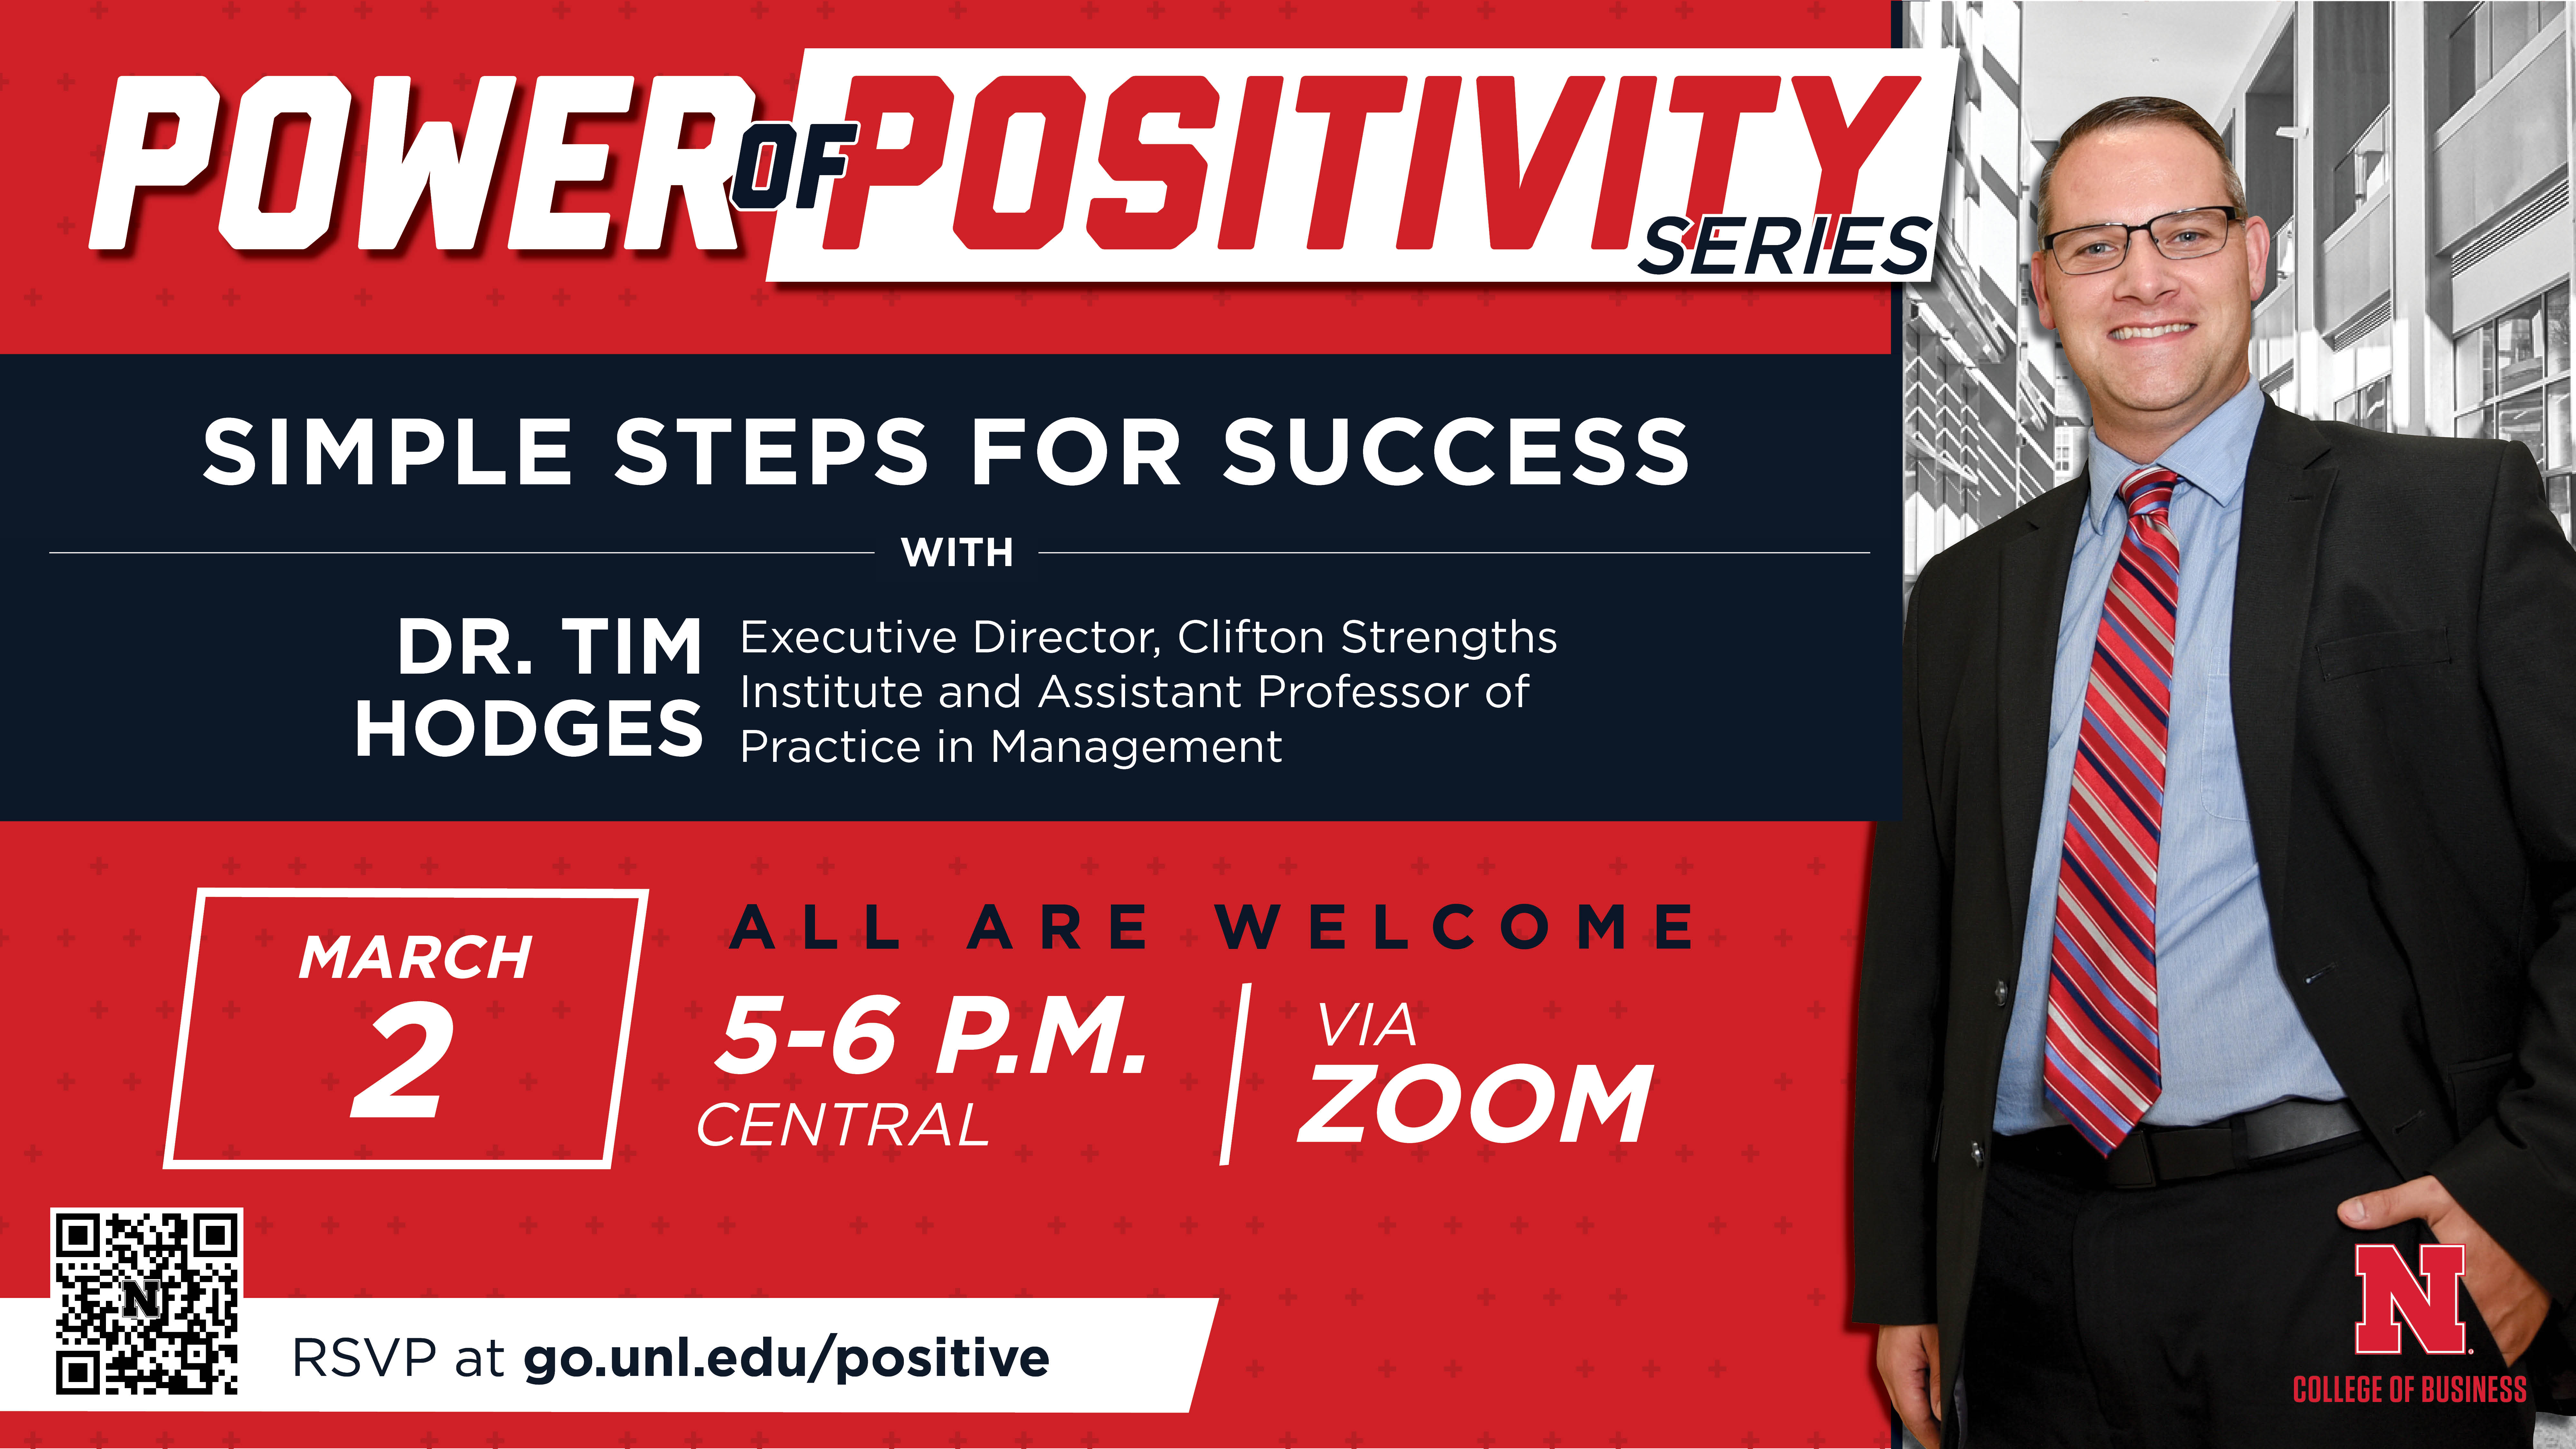 Power of Positivity Series: Simple Steps for Success with Tim Hodges